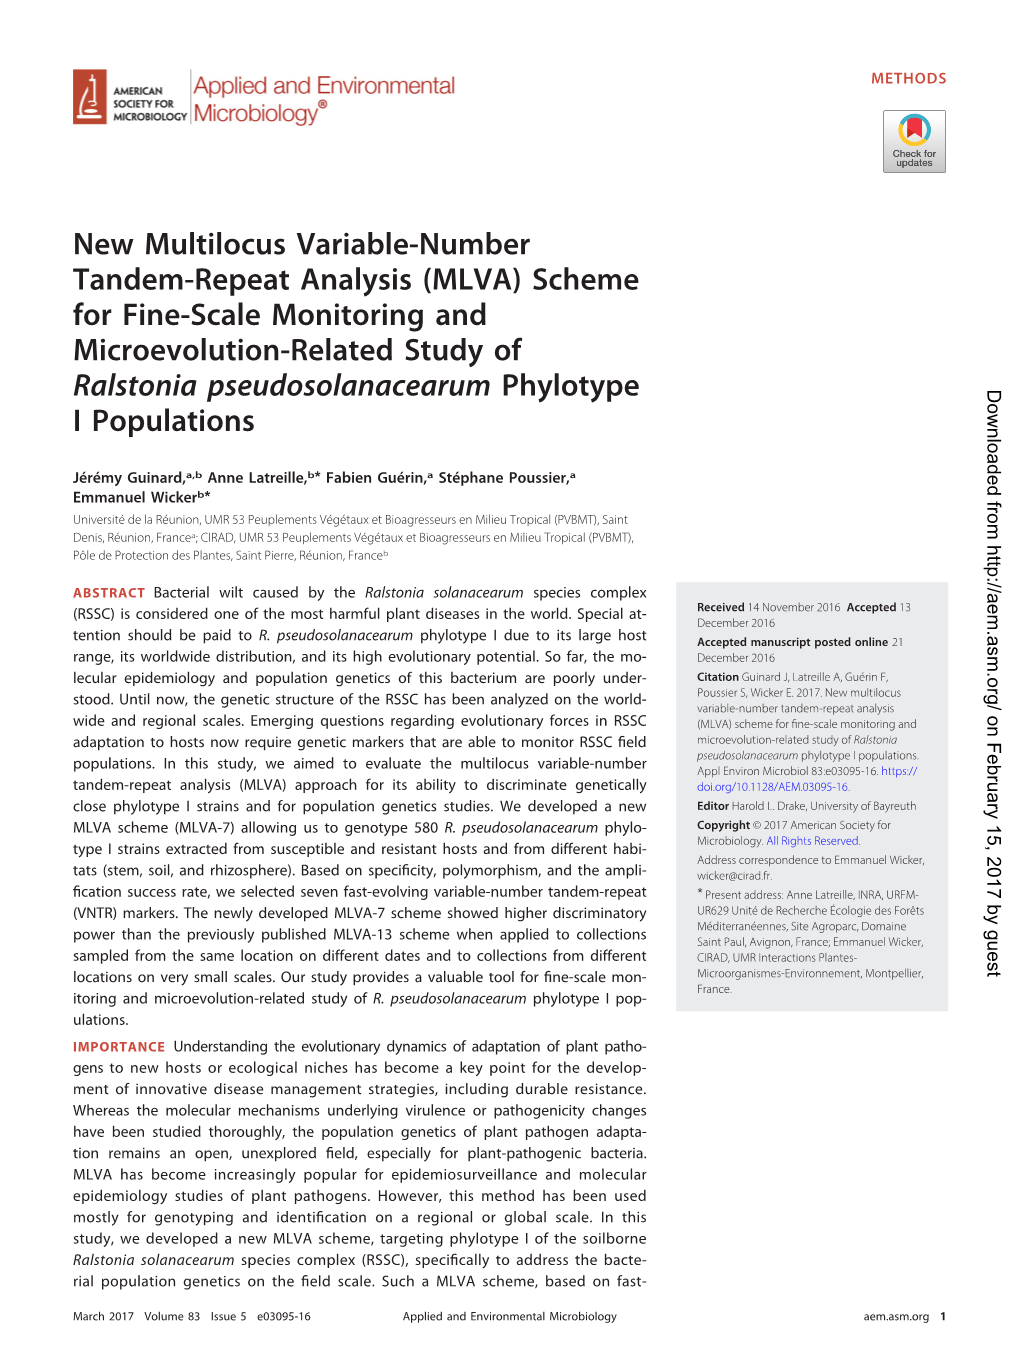 MLVA) Scheme for Fine-Scale Monitoring and Microevolution-Related Study Of